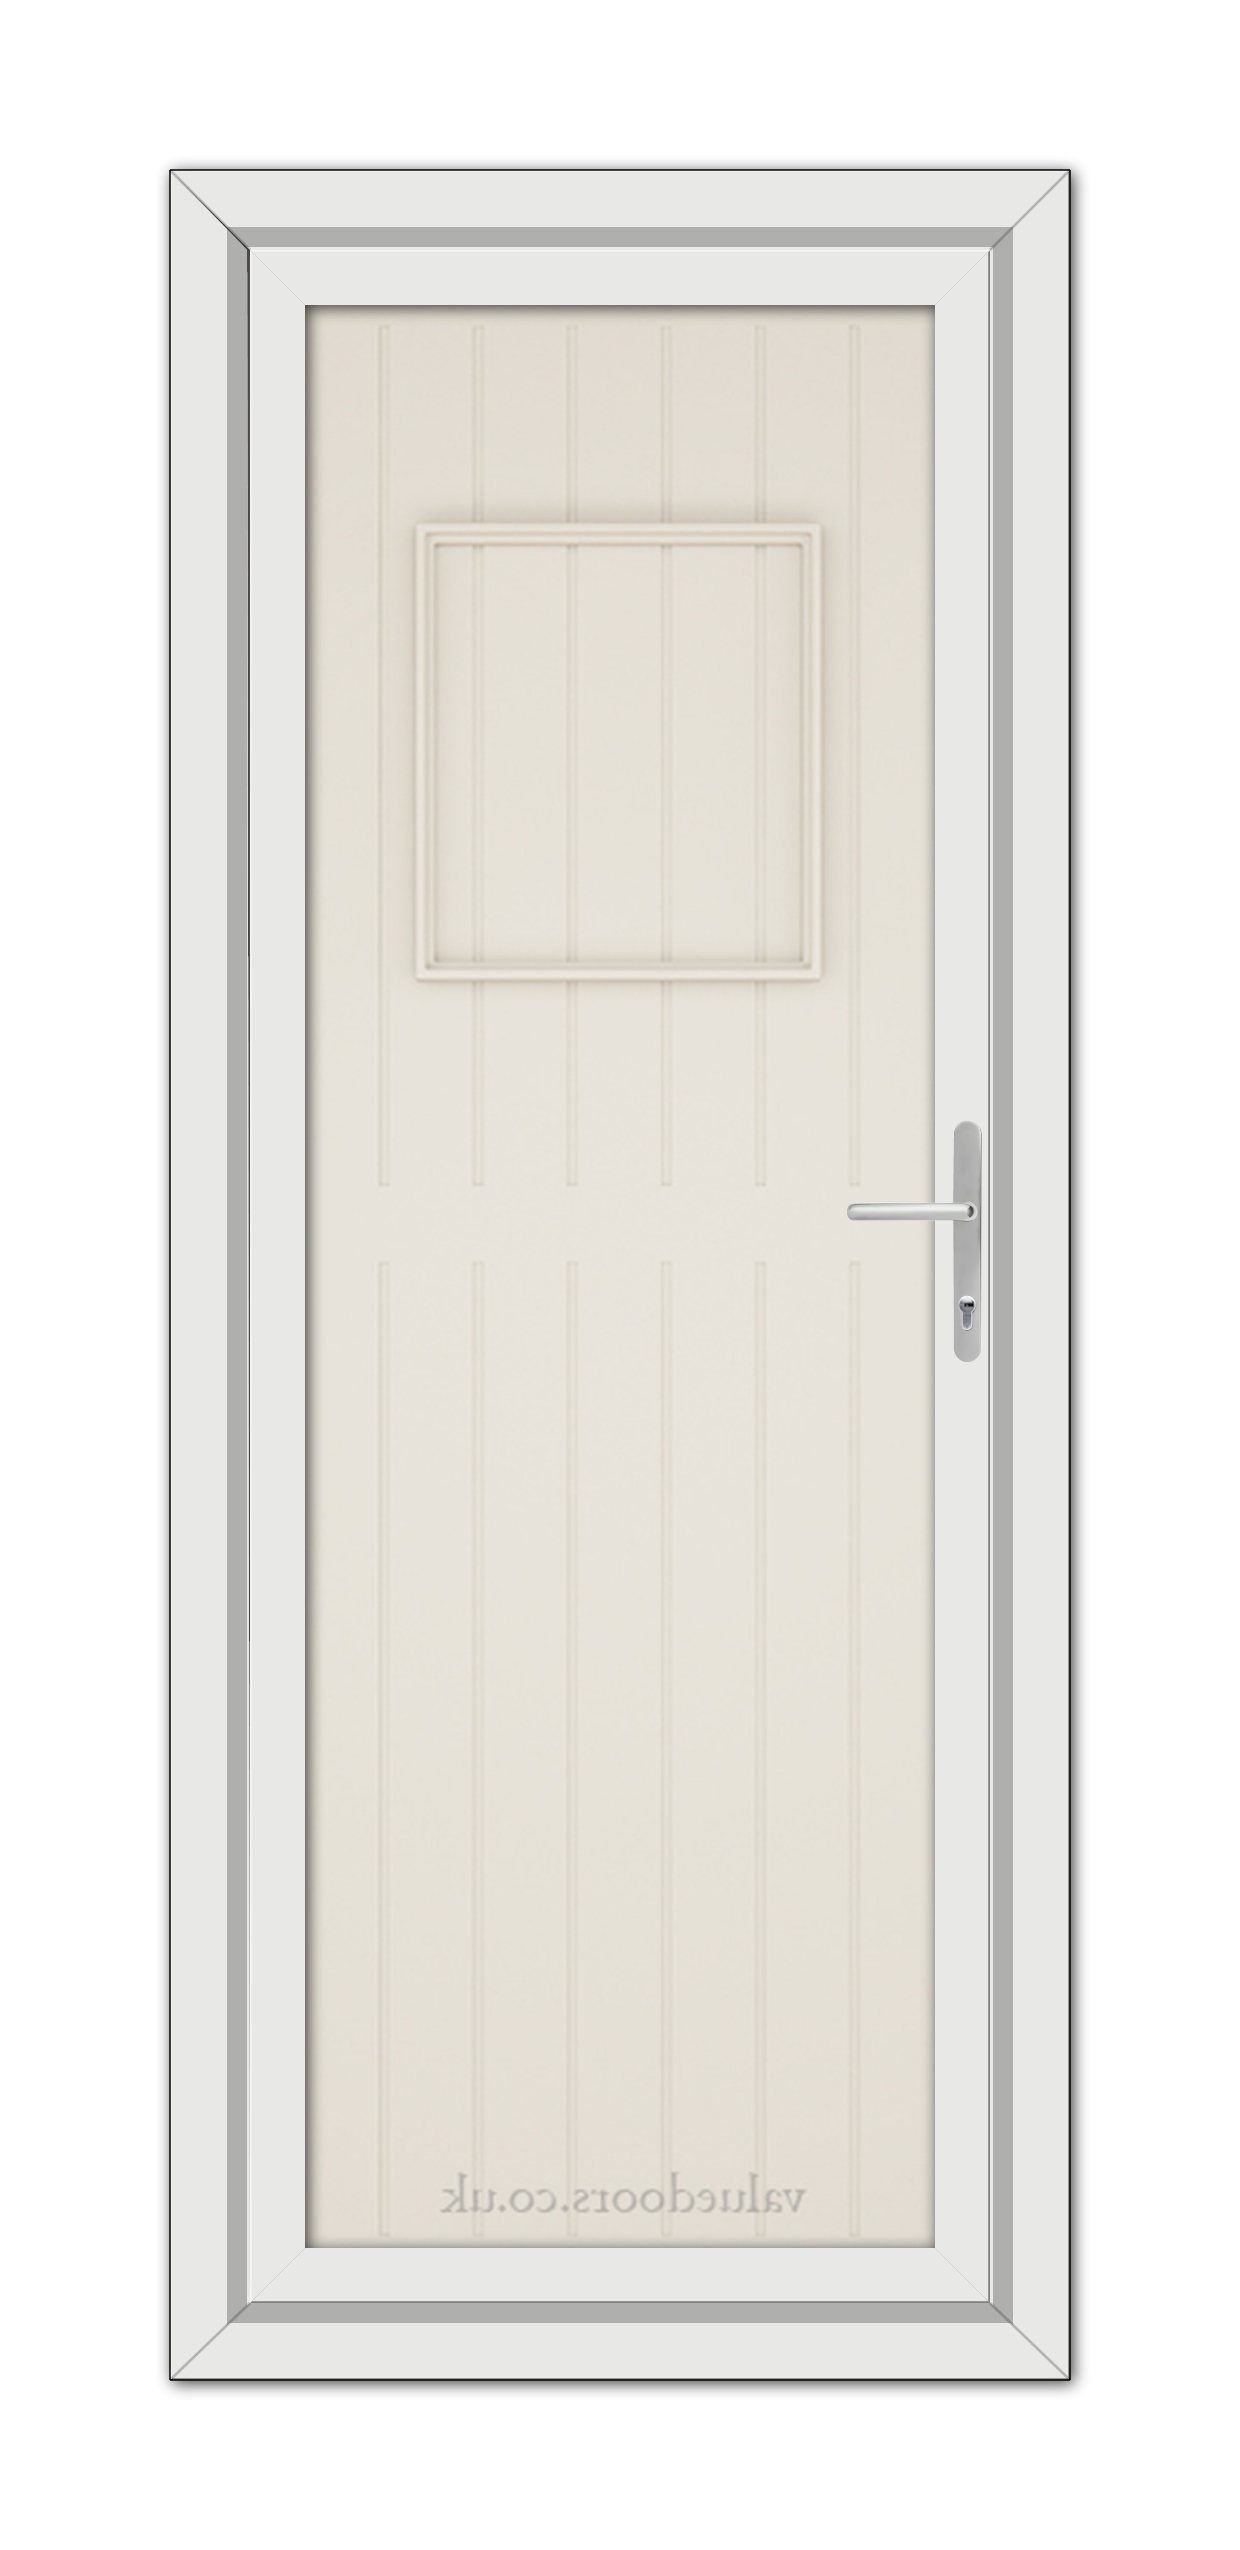 A modern Cream Chatsworth Solid uPVC Door with a rectangular frosted glass window at the top, framed by a gray border and featuring a metallic handle on the right side.